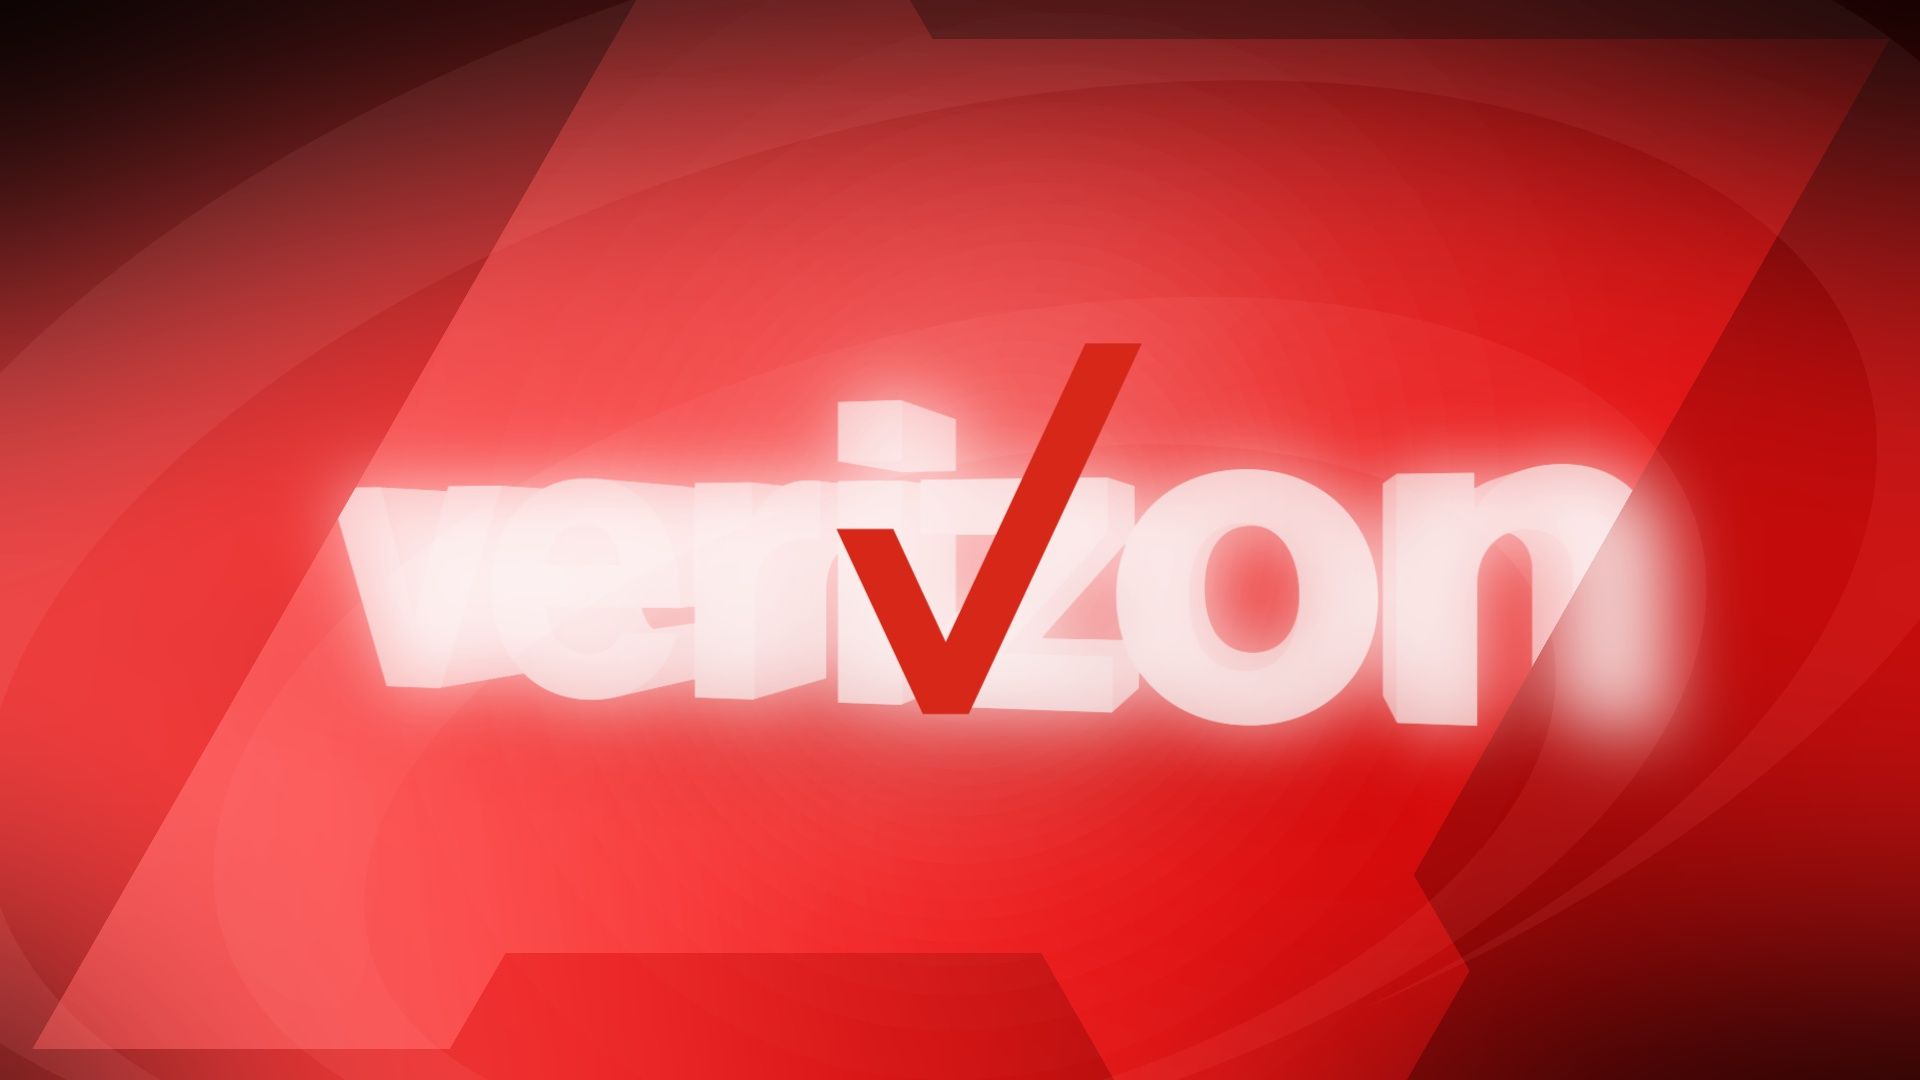 The Verizon logo against a red background